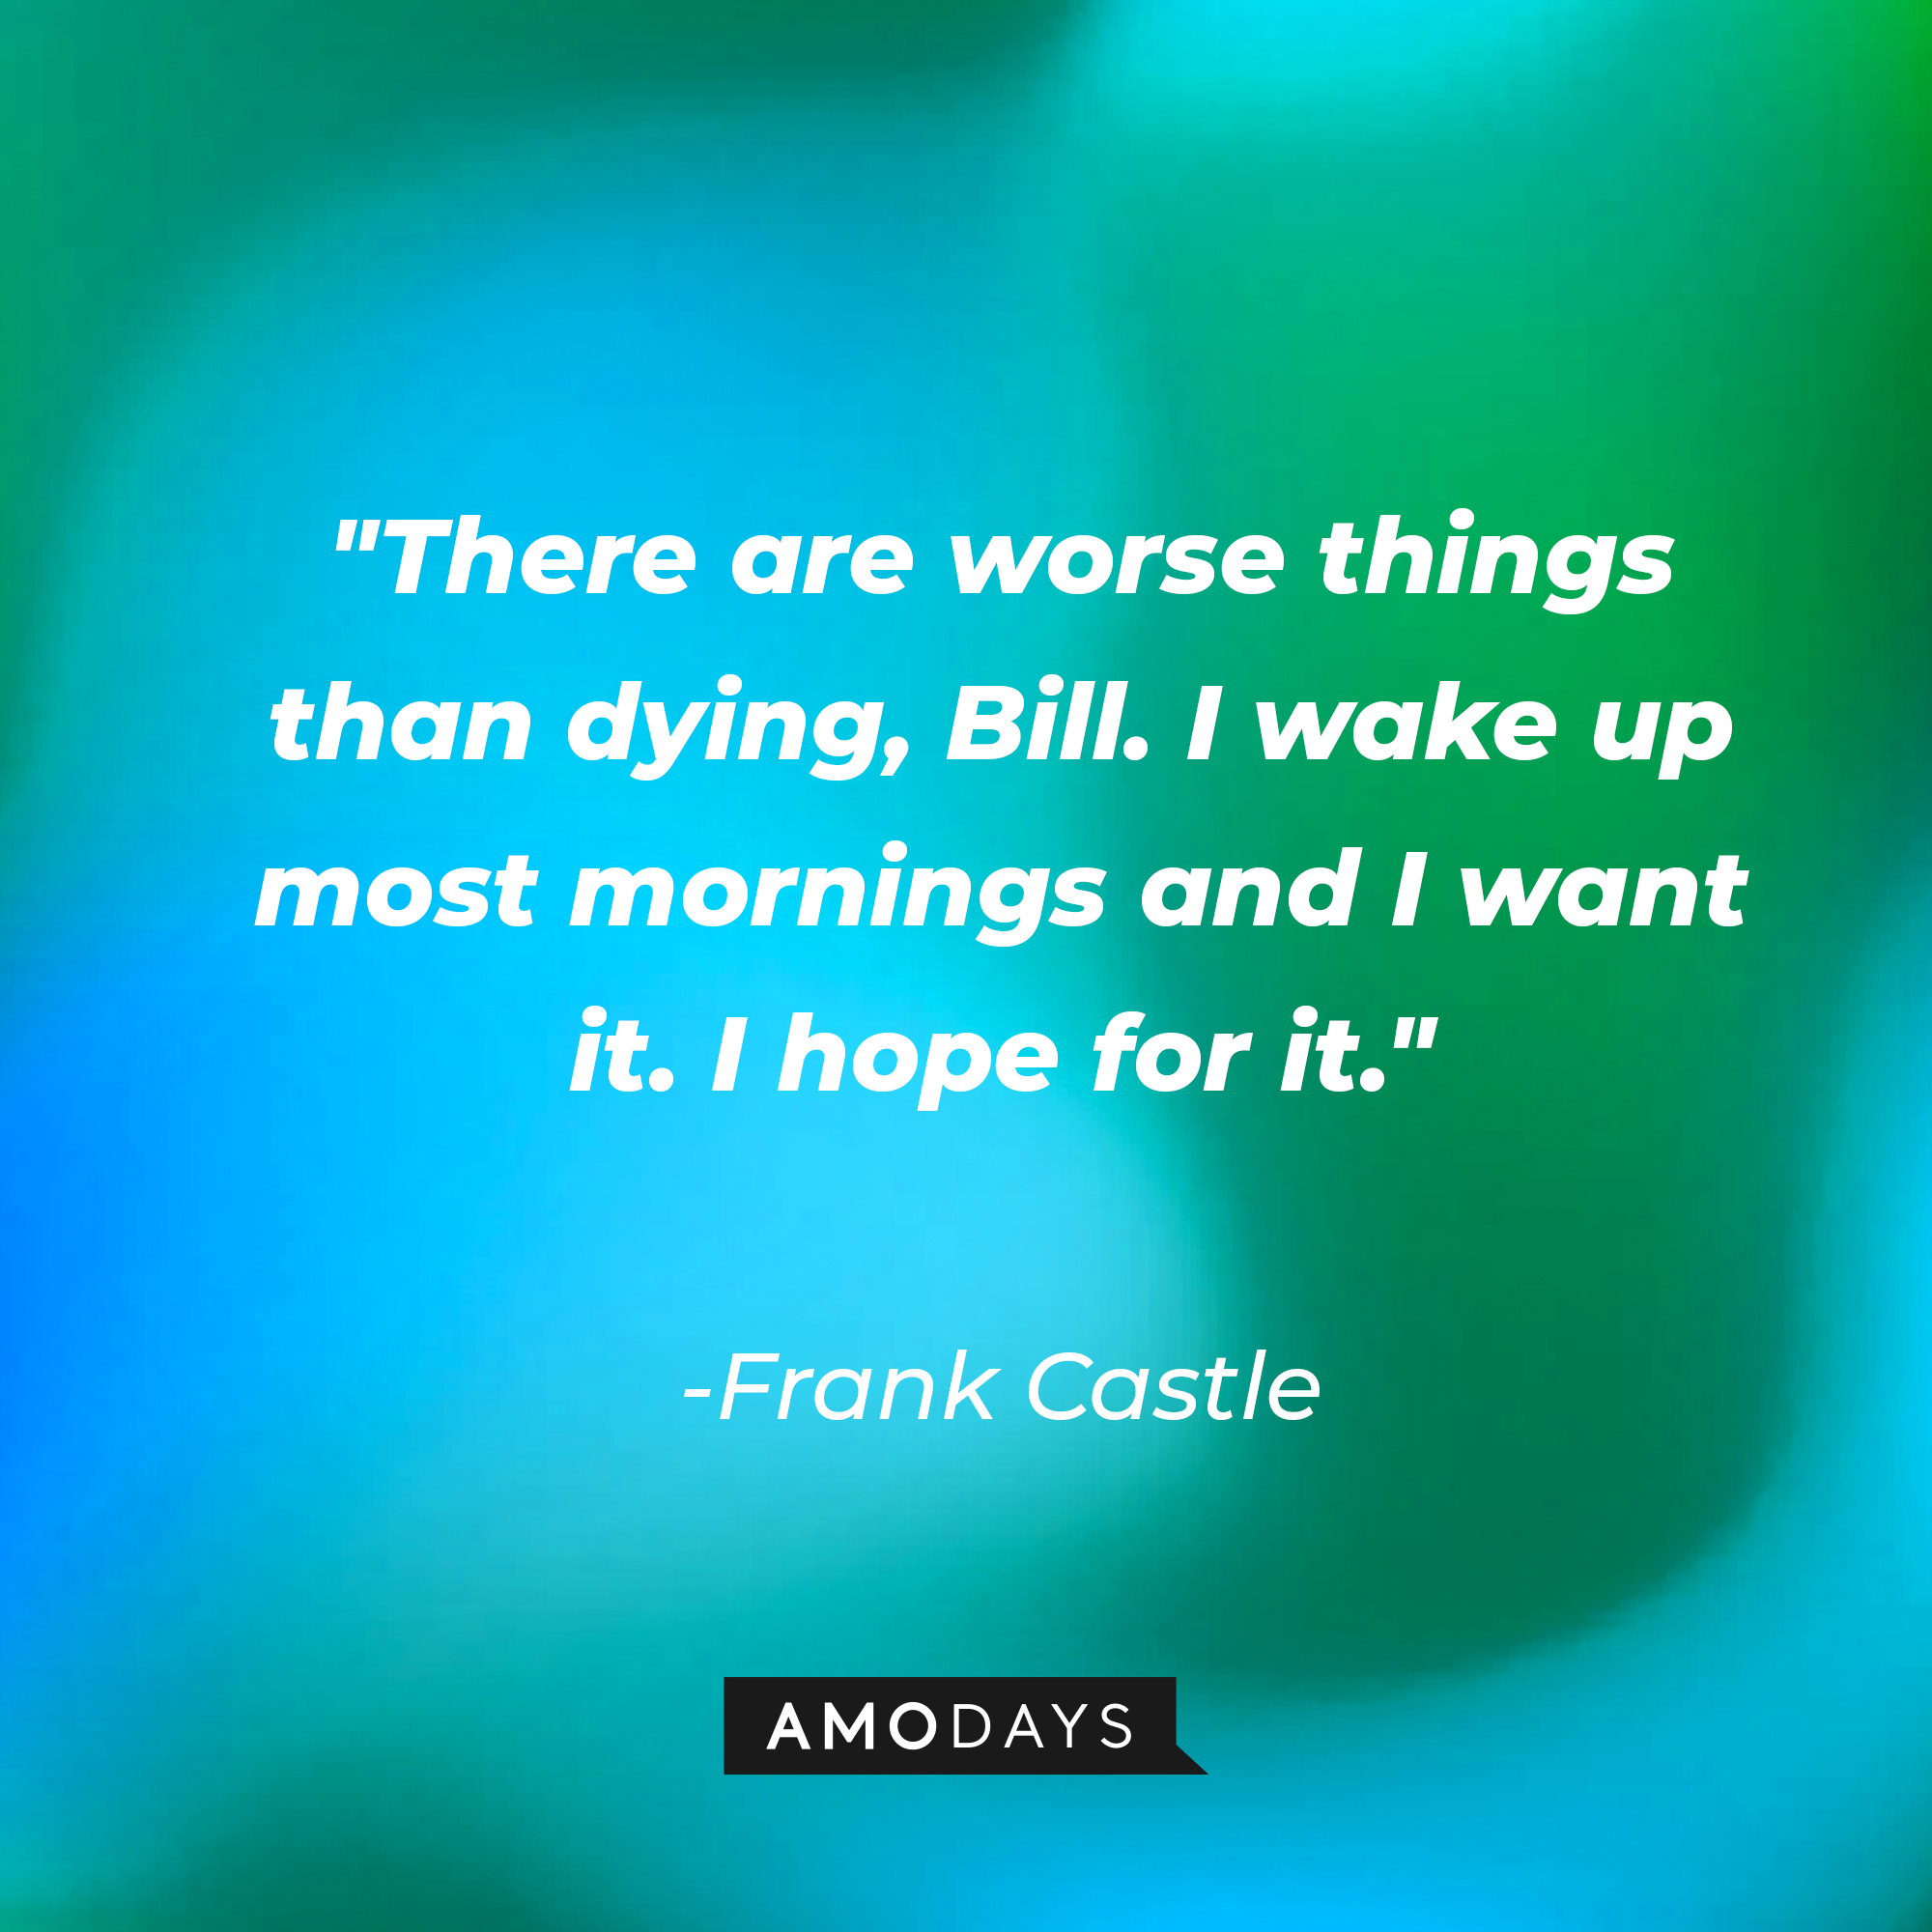 Frank Castle's quote: "There are worse things than dying, Bill. I wake up most mornings and I want it. I hope for it." | Source: AmoDays